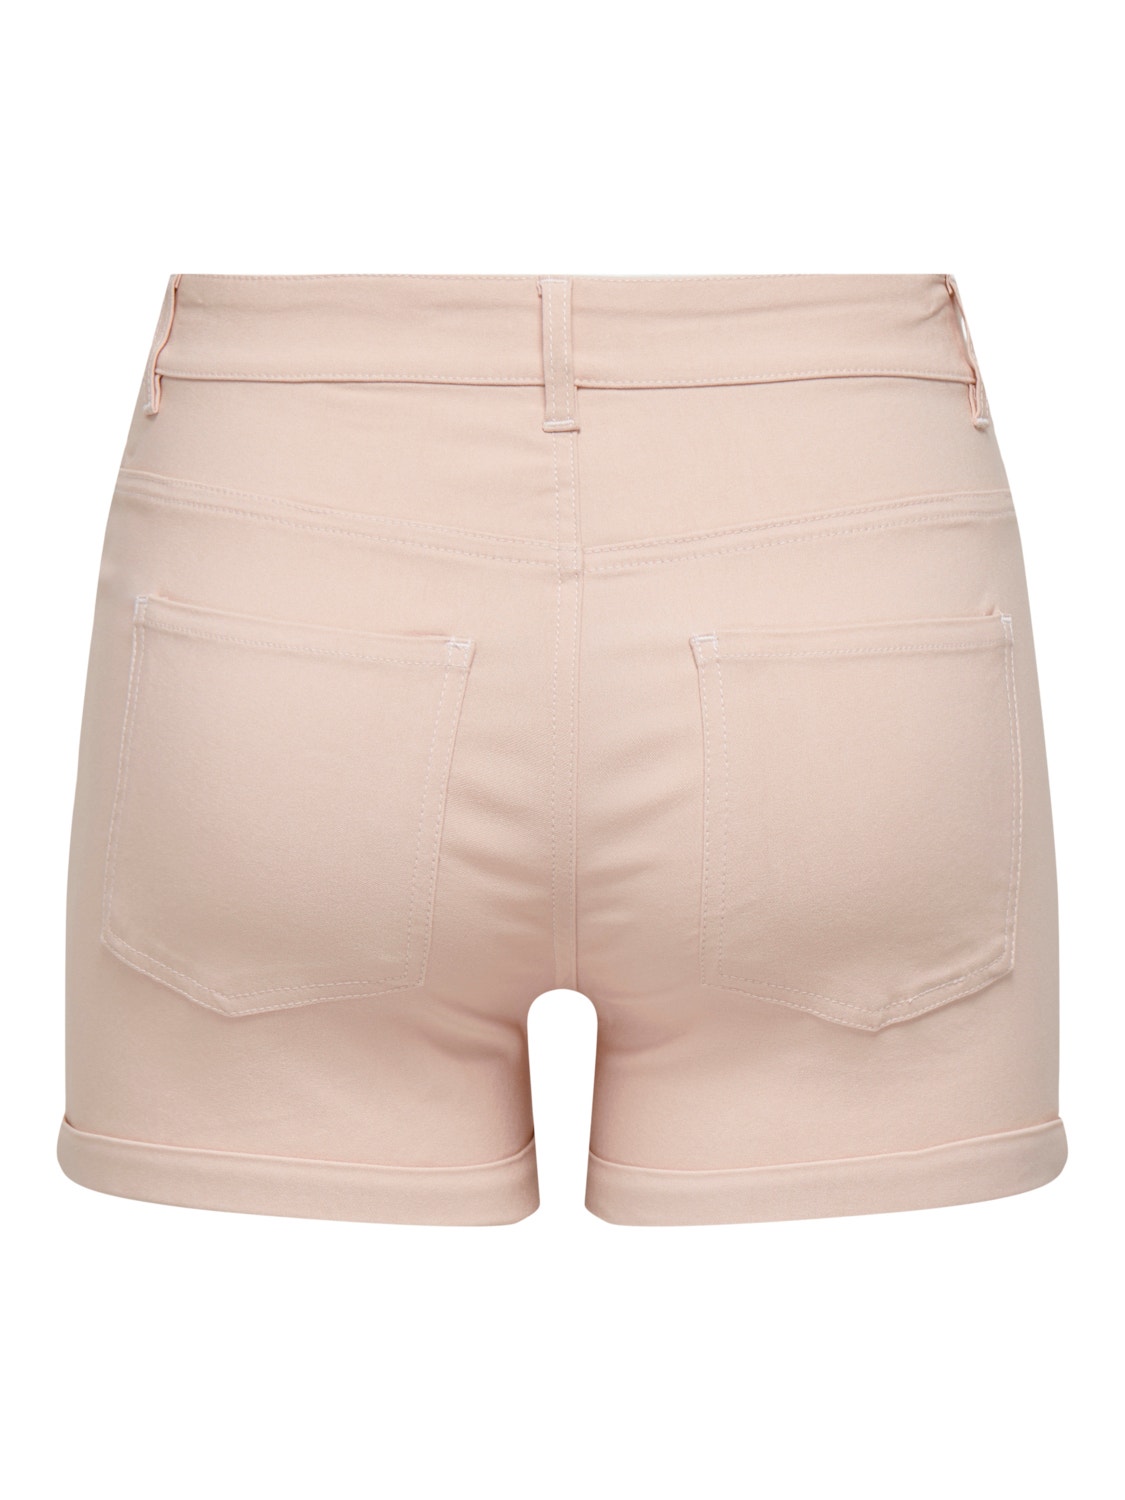 ONLY Slim Fit Shorts -Peach Whip - 15291275